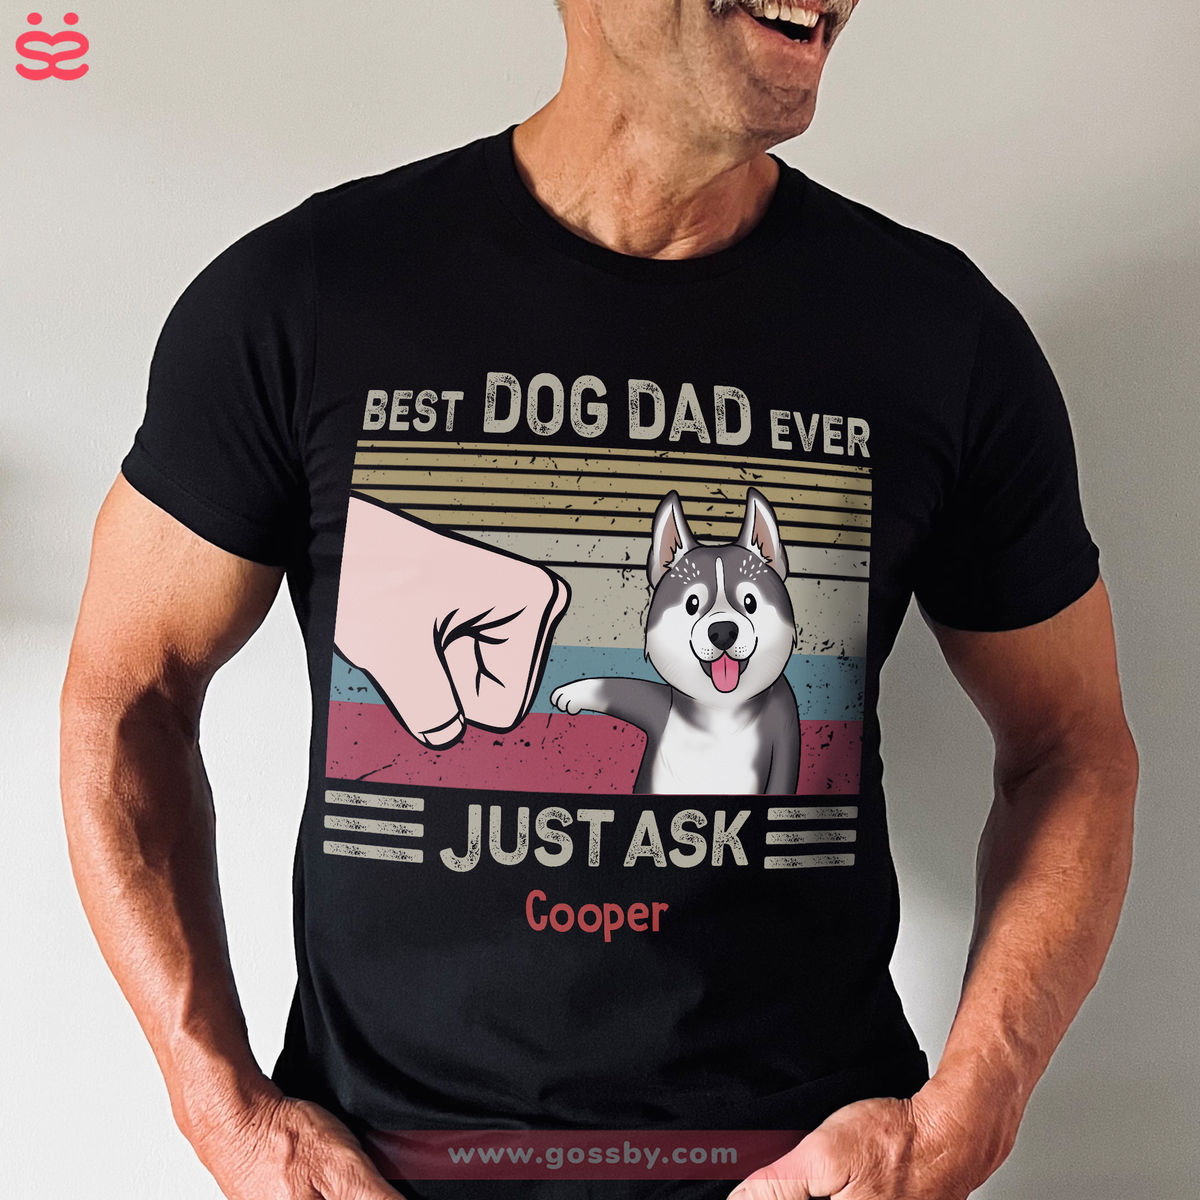 Gossby Personalized Classic Tee Black S - Up to 3 Dogs - Funny T Shirt - Best Dog Dad Ever, Just Ask